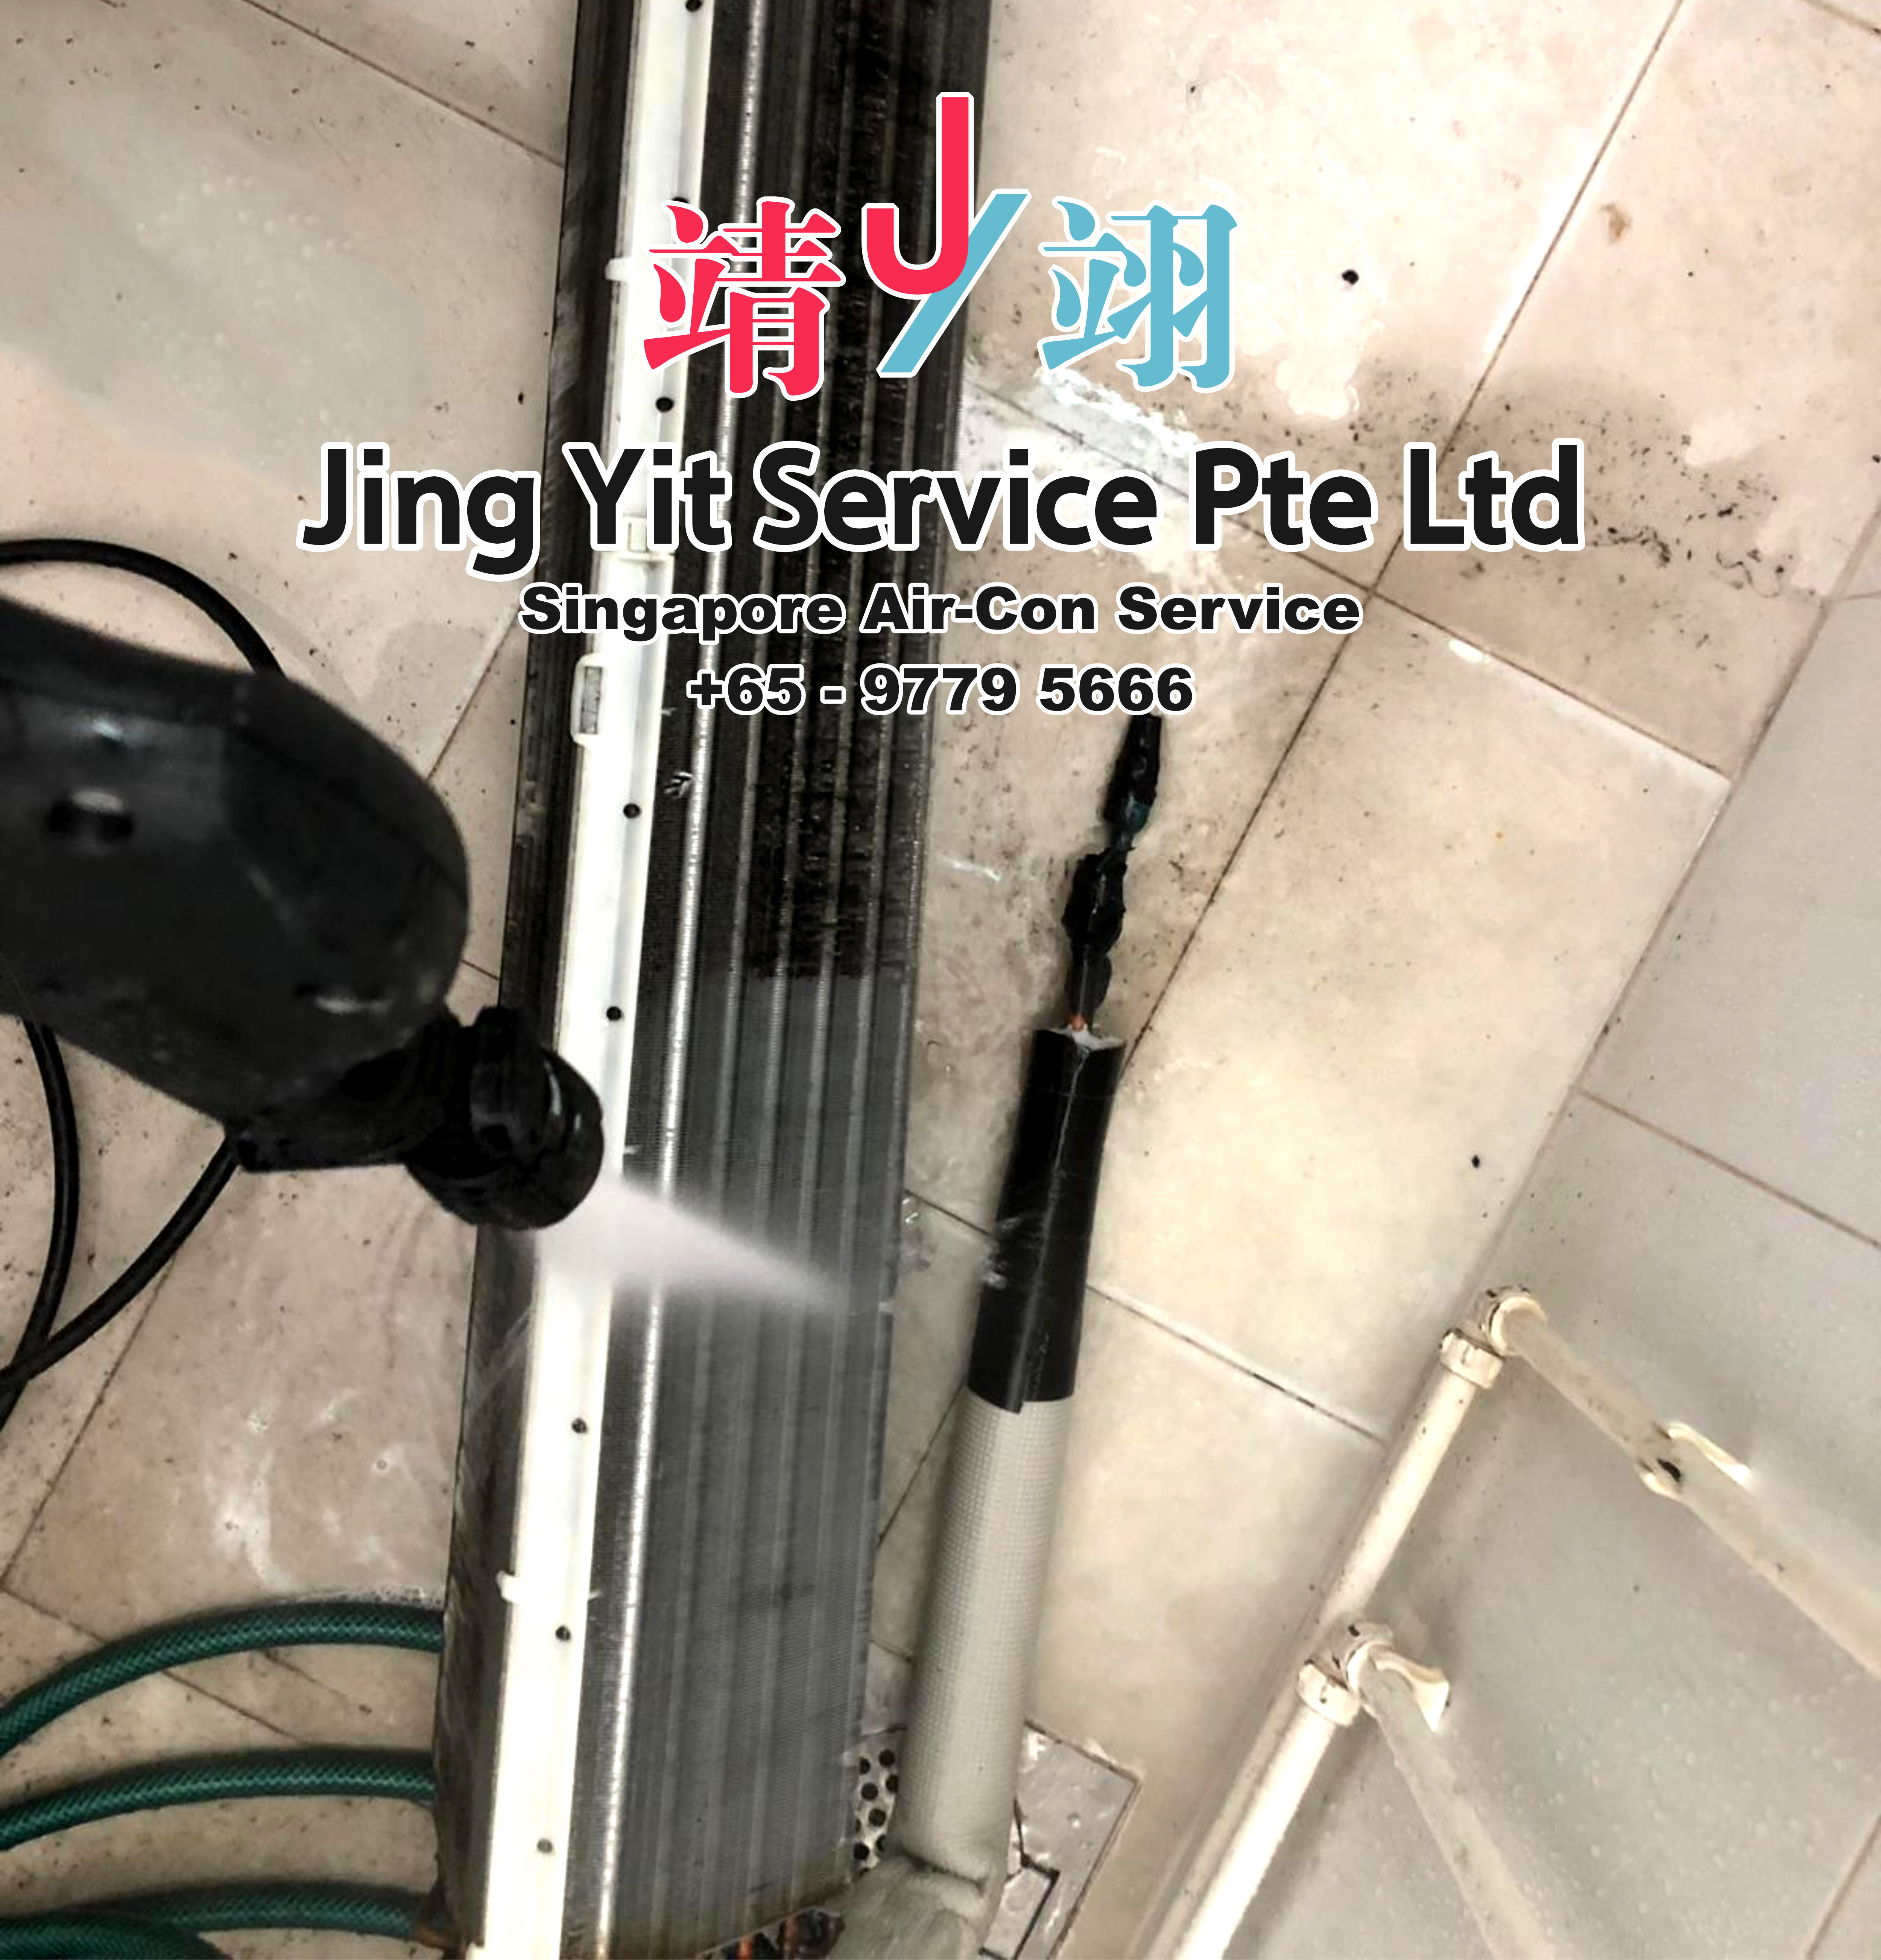 Singapore AirCon Service Air Conditioning Cleaning Repairing and Installation Air-con Gas Refill Aircon Chemical Wash Singapore Jing Yit Service Pte Ltd A02-10